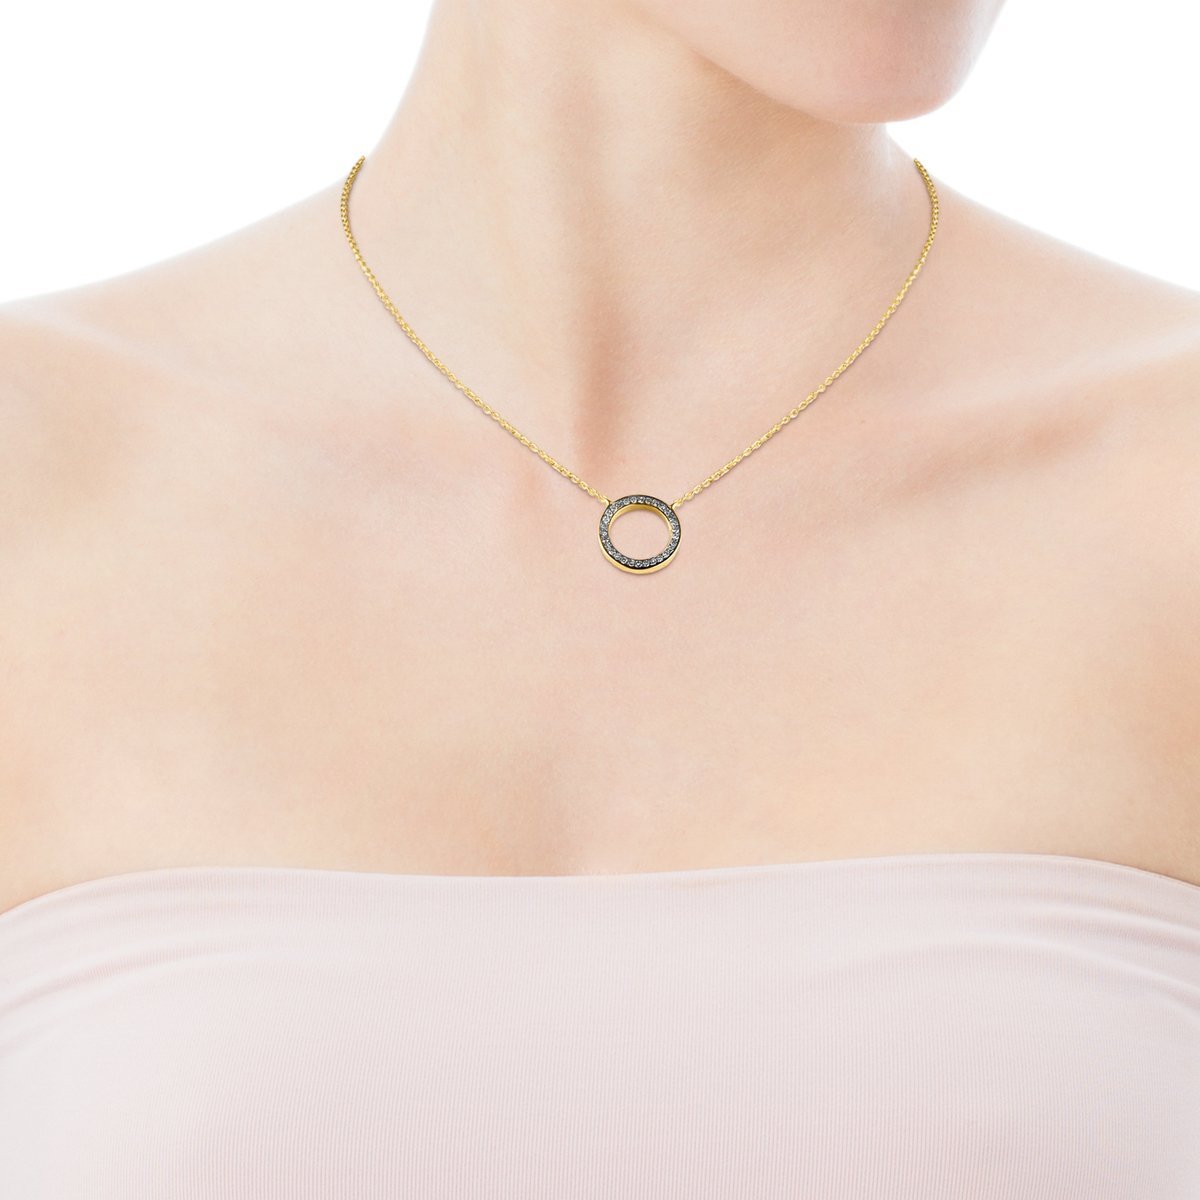 Tous Nocturne disc Necklace in Gold Vermeil with Diamonds 918442570